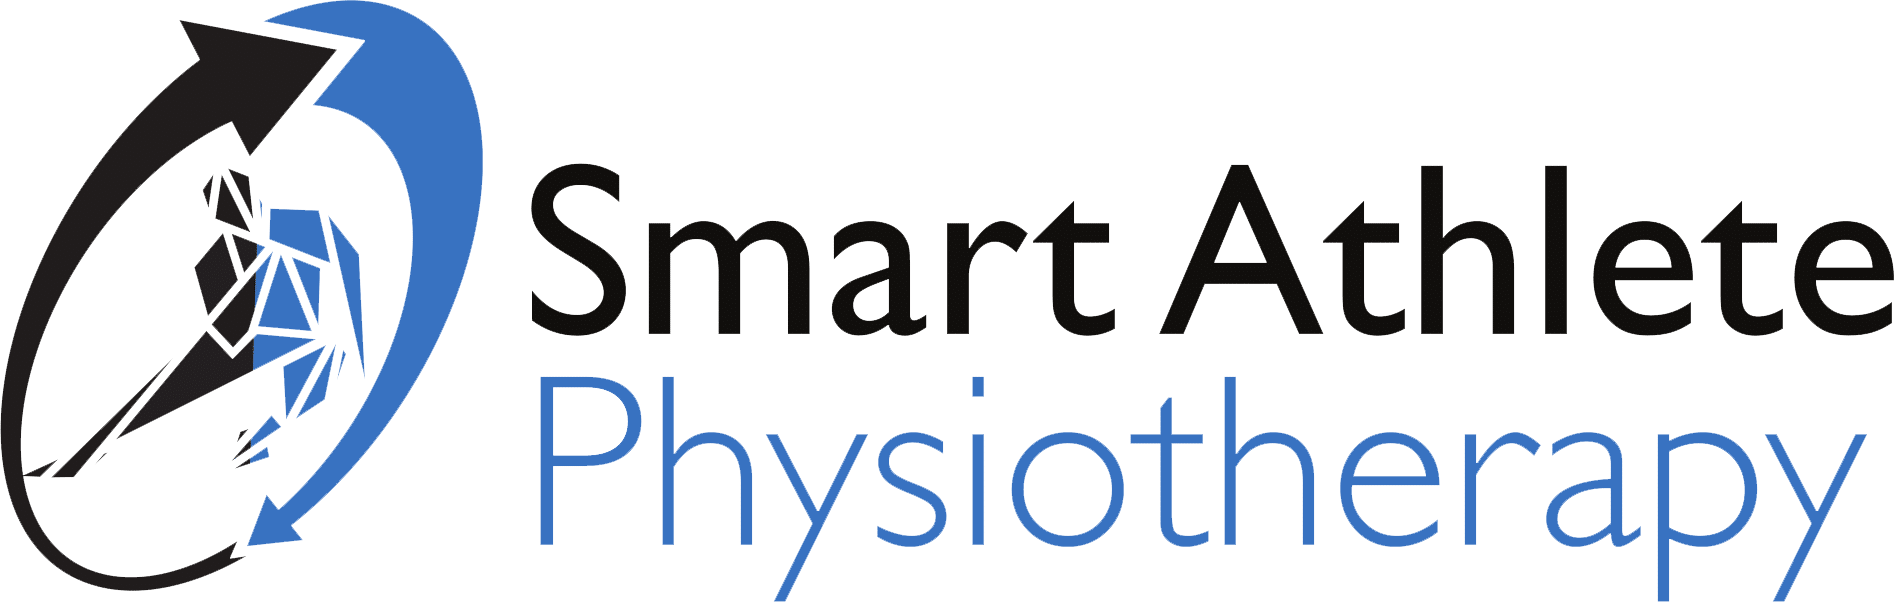 smart athlete physiotherapy